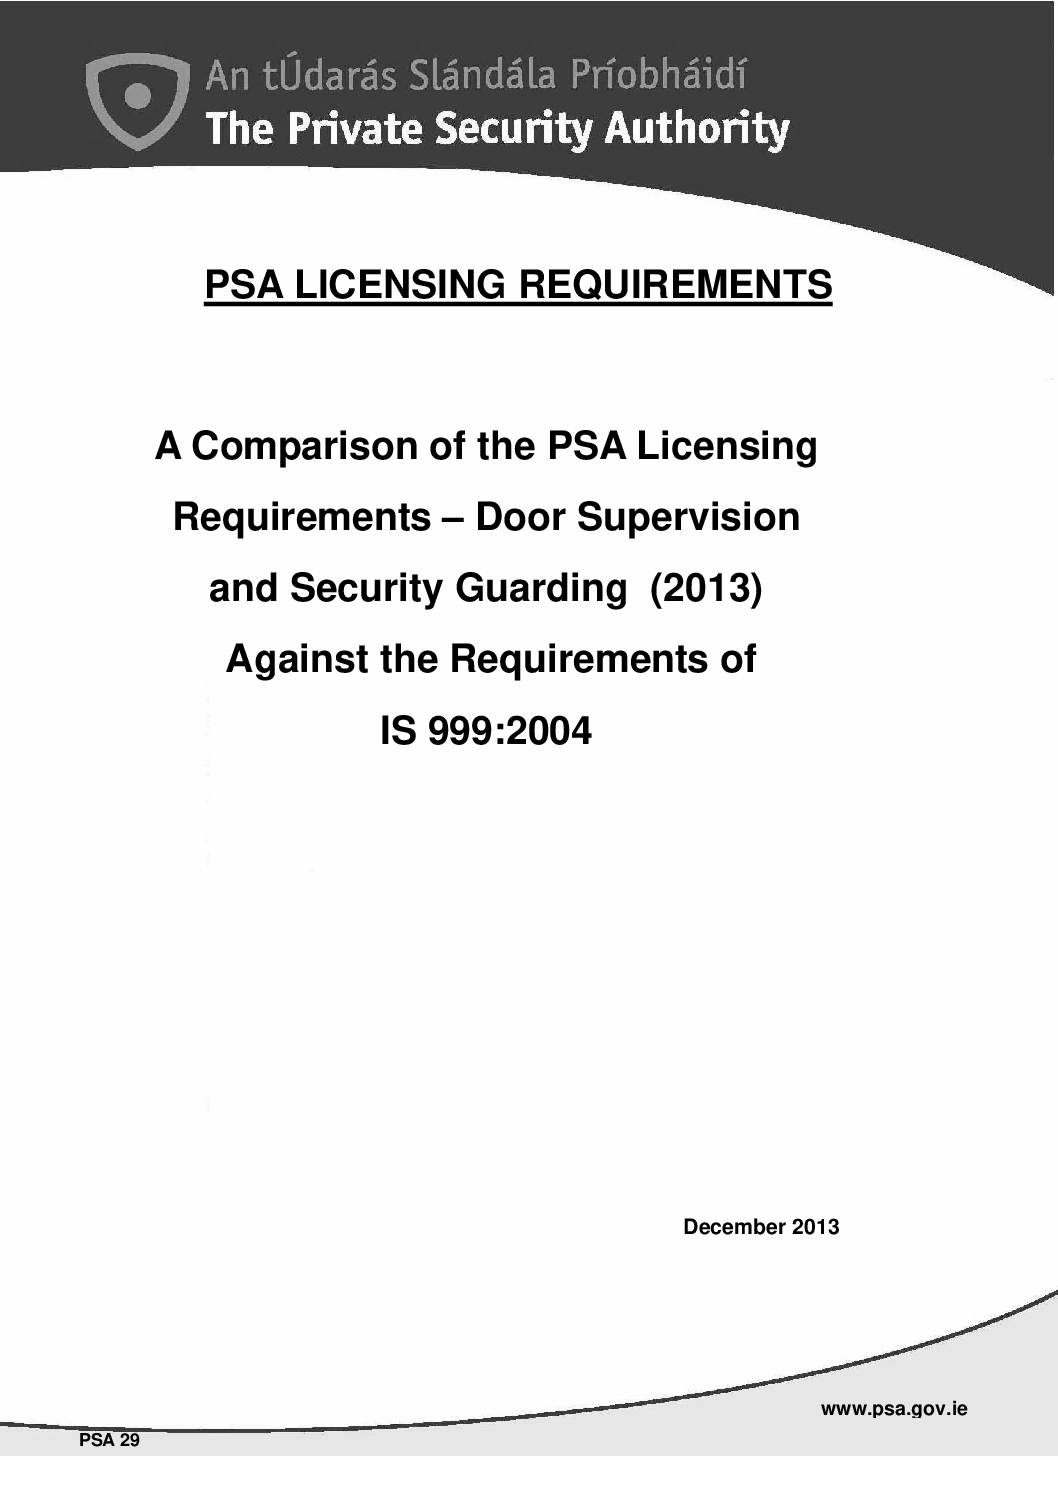 PSA Licensing Requirements